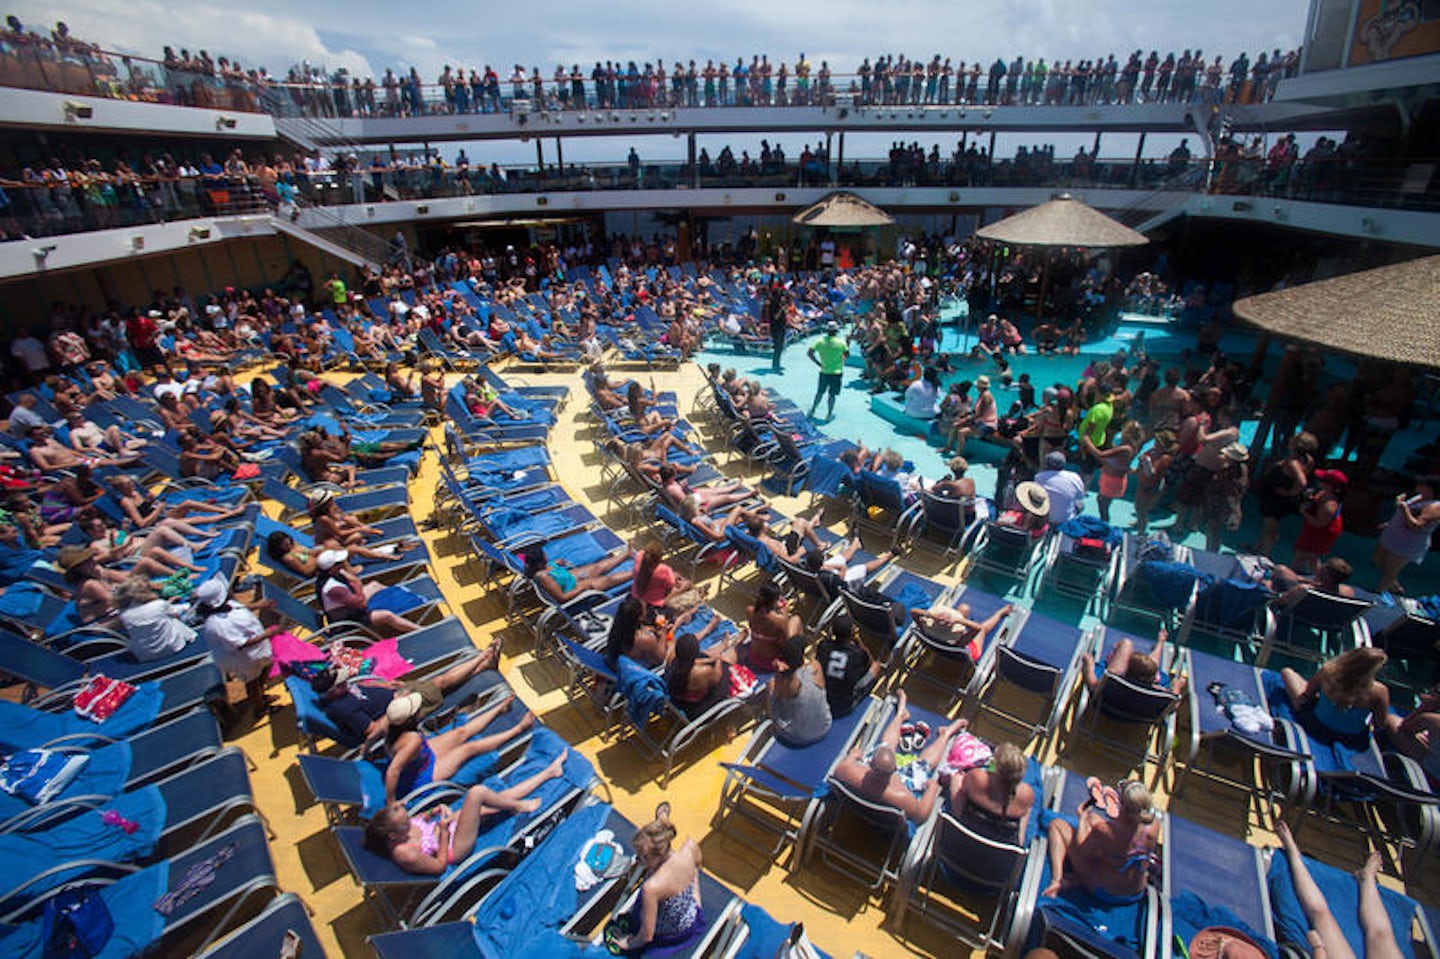 The Lido Deck on Carnival Breeze